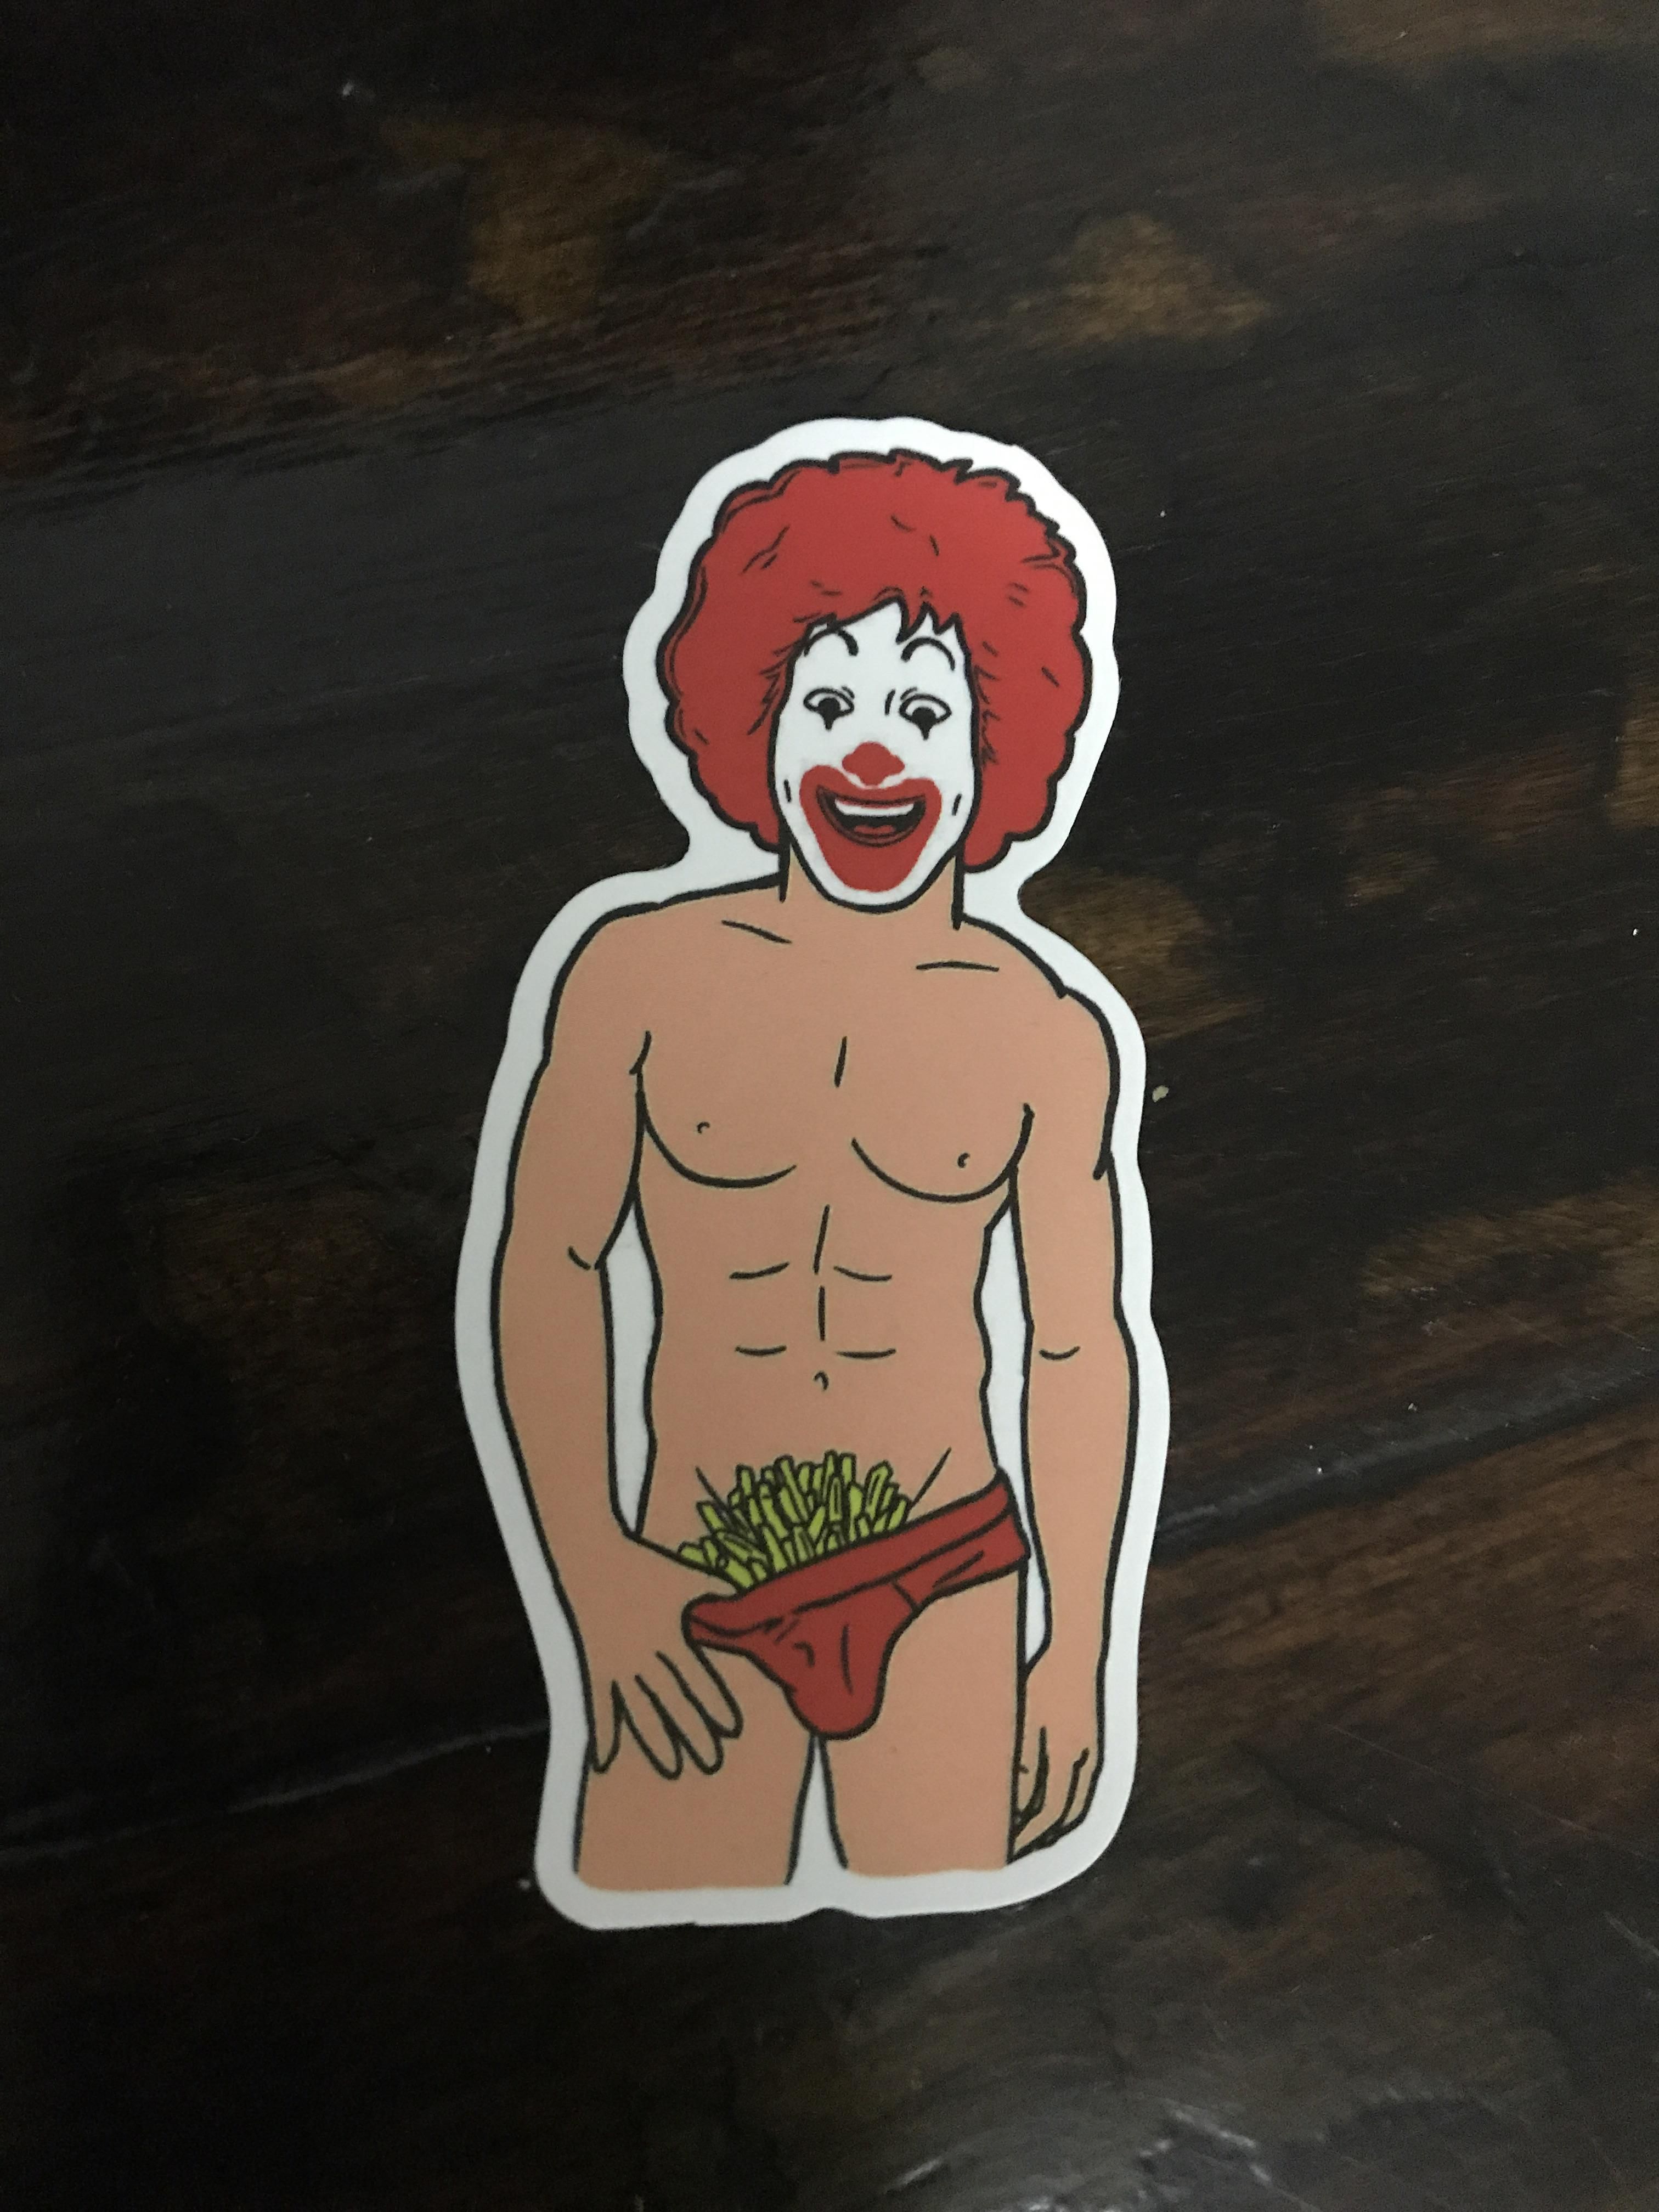 Ordered a pack of random stickers on amazon, wanted to share my favorite one